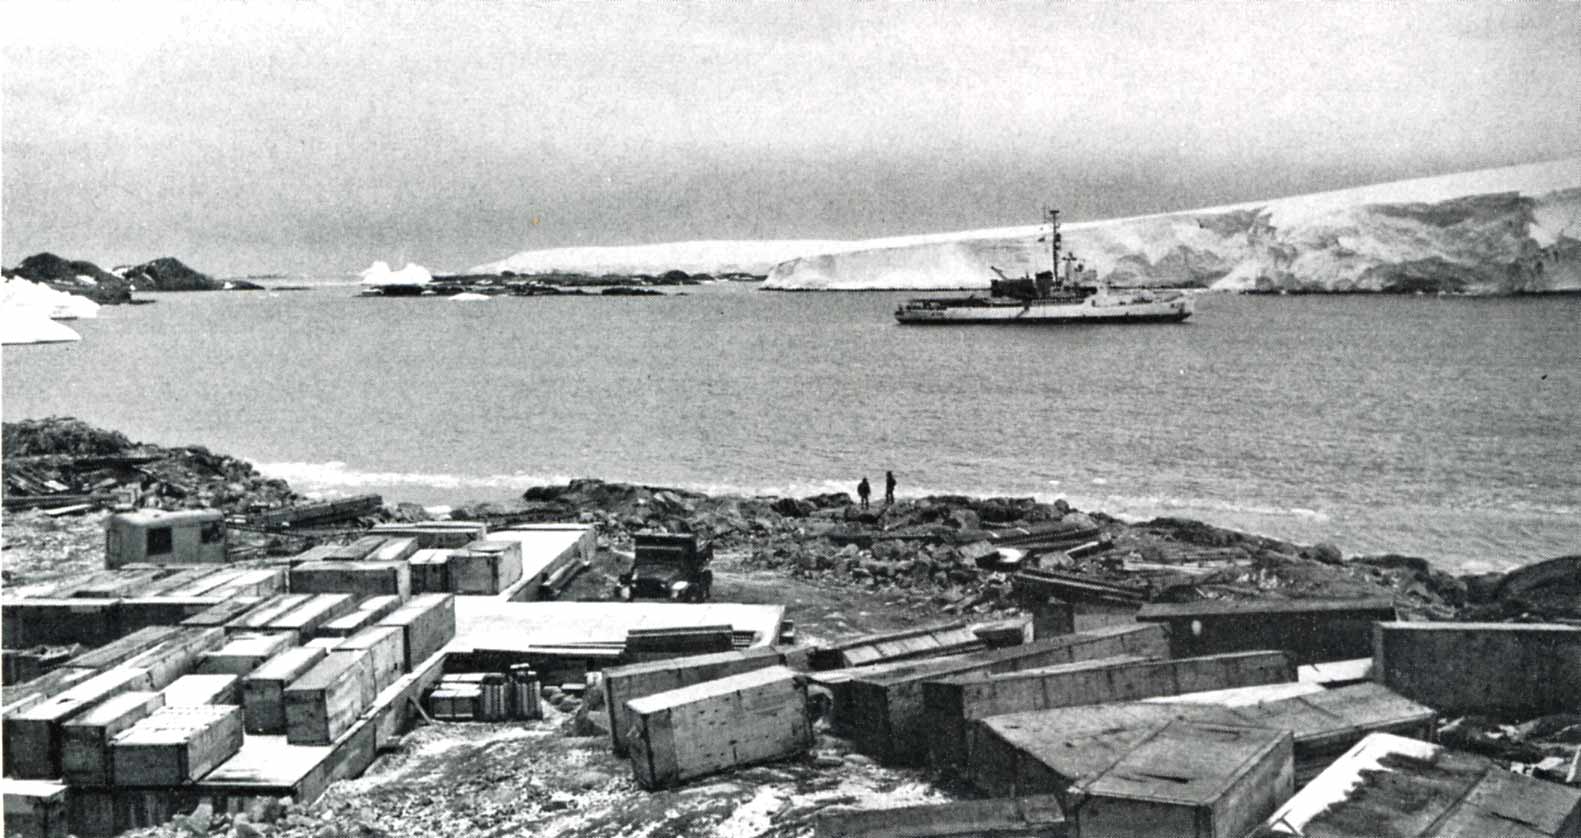 The Coast Guard Cutter Westwind at anchor in Arthur Harbor in winter 1967, after arriving on January 8 with a team of Navy Seabees. After transferring the team and several tons of gear ashore, the Westwind stayed on station as construction began on Palmer Station. Photo from the Palmer Station history pages at palmerstation.com.